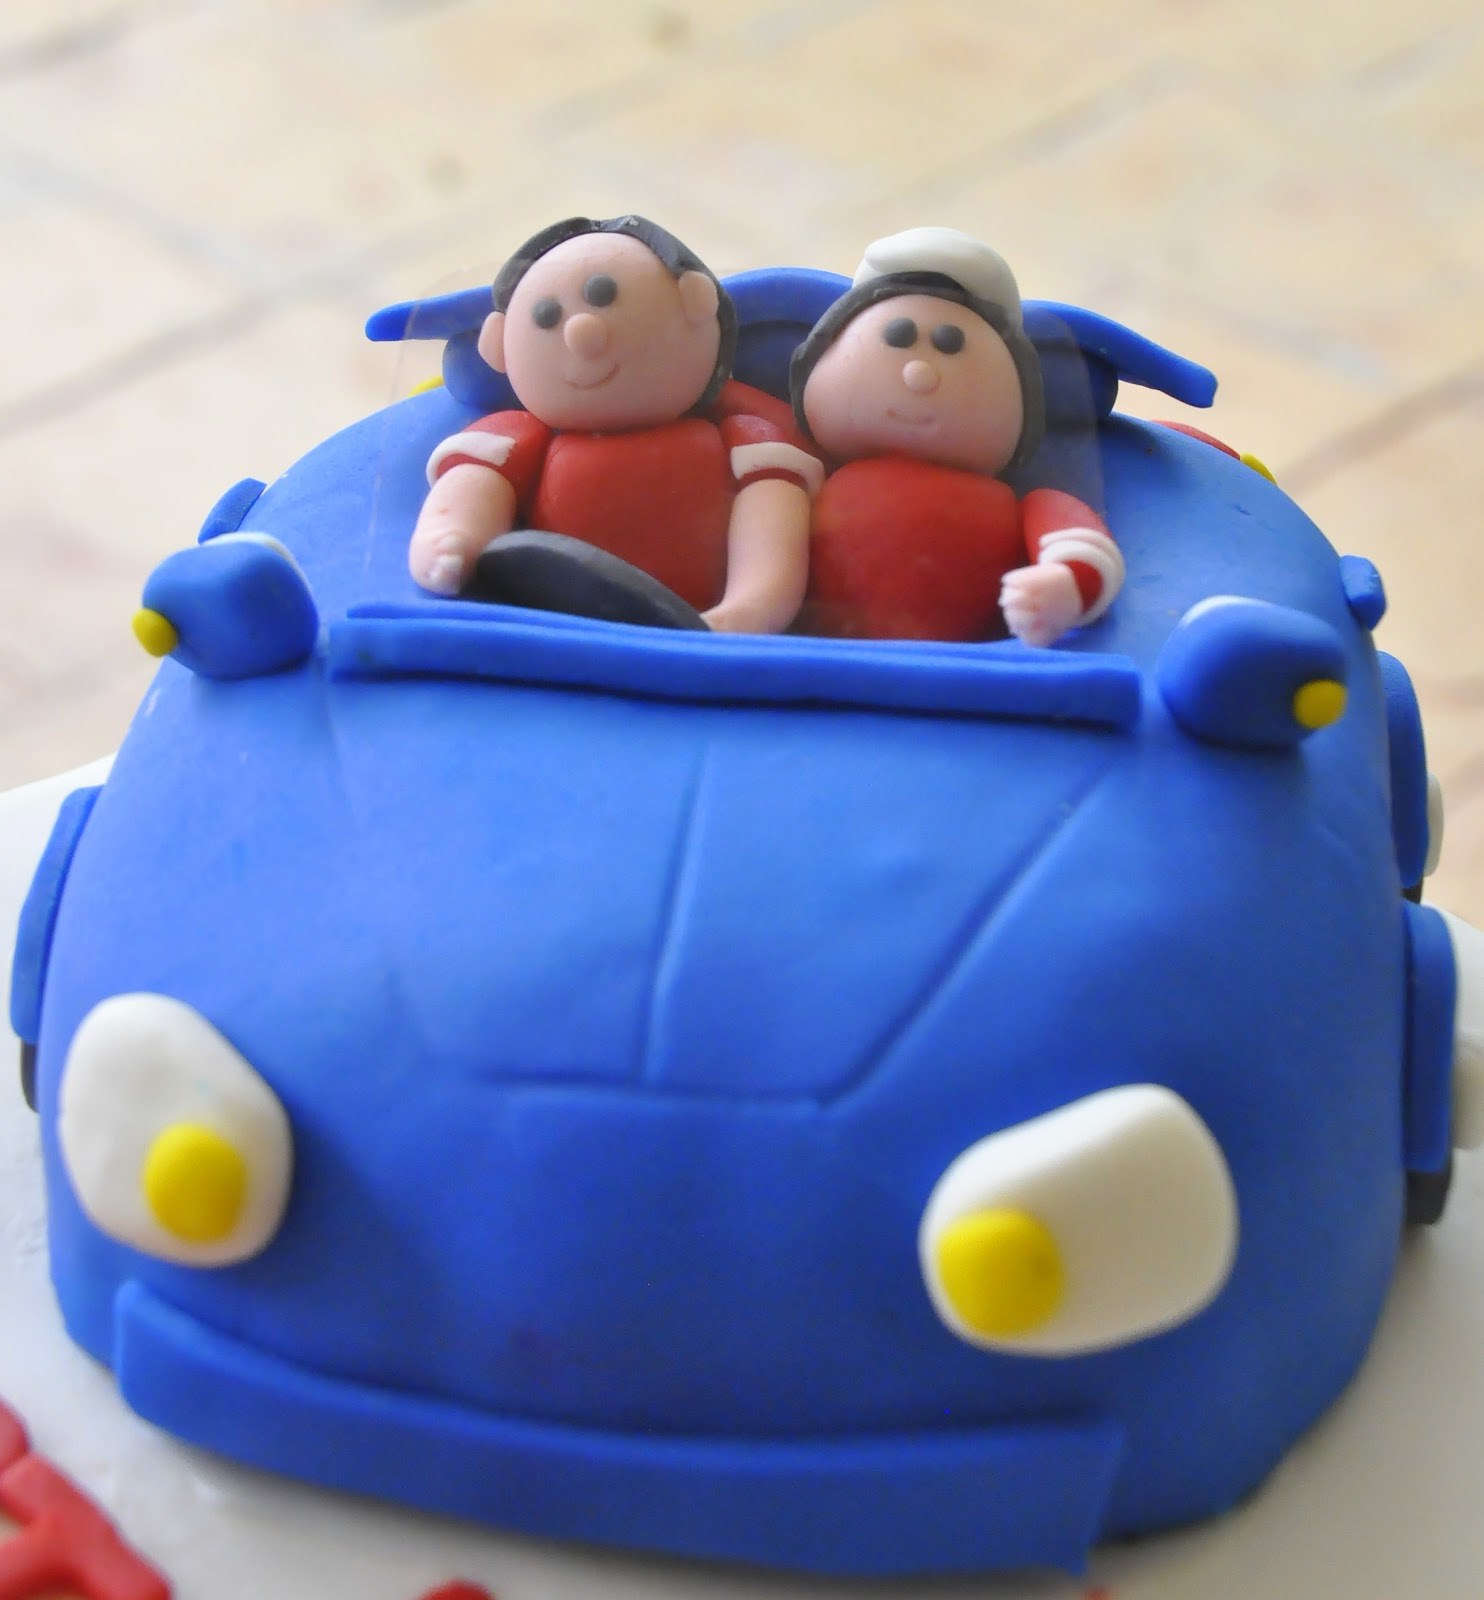 Happy Birthday Cake For Twins Boy , HD Wallpaper & Backgrounds